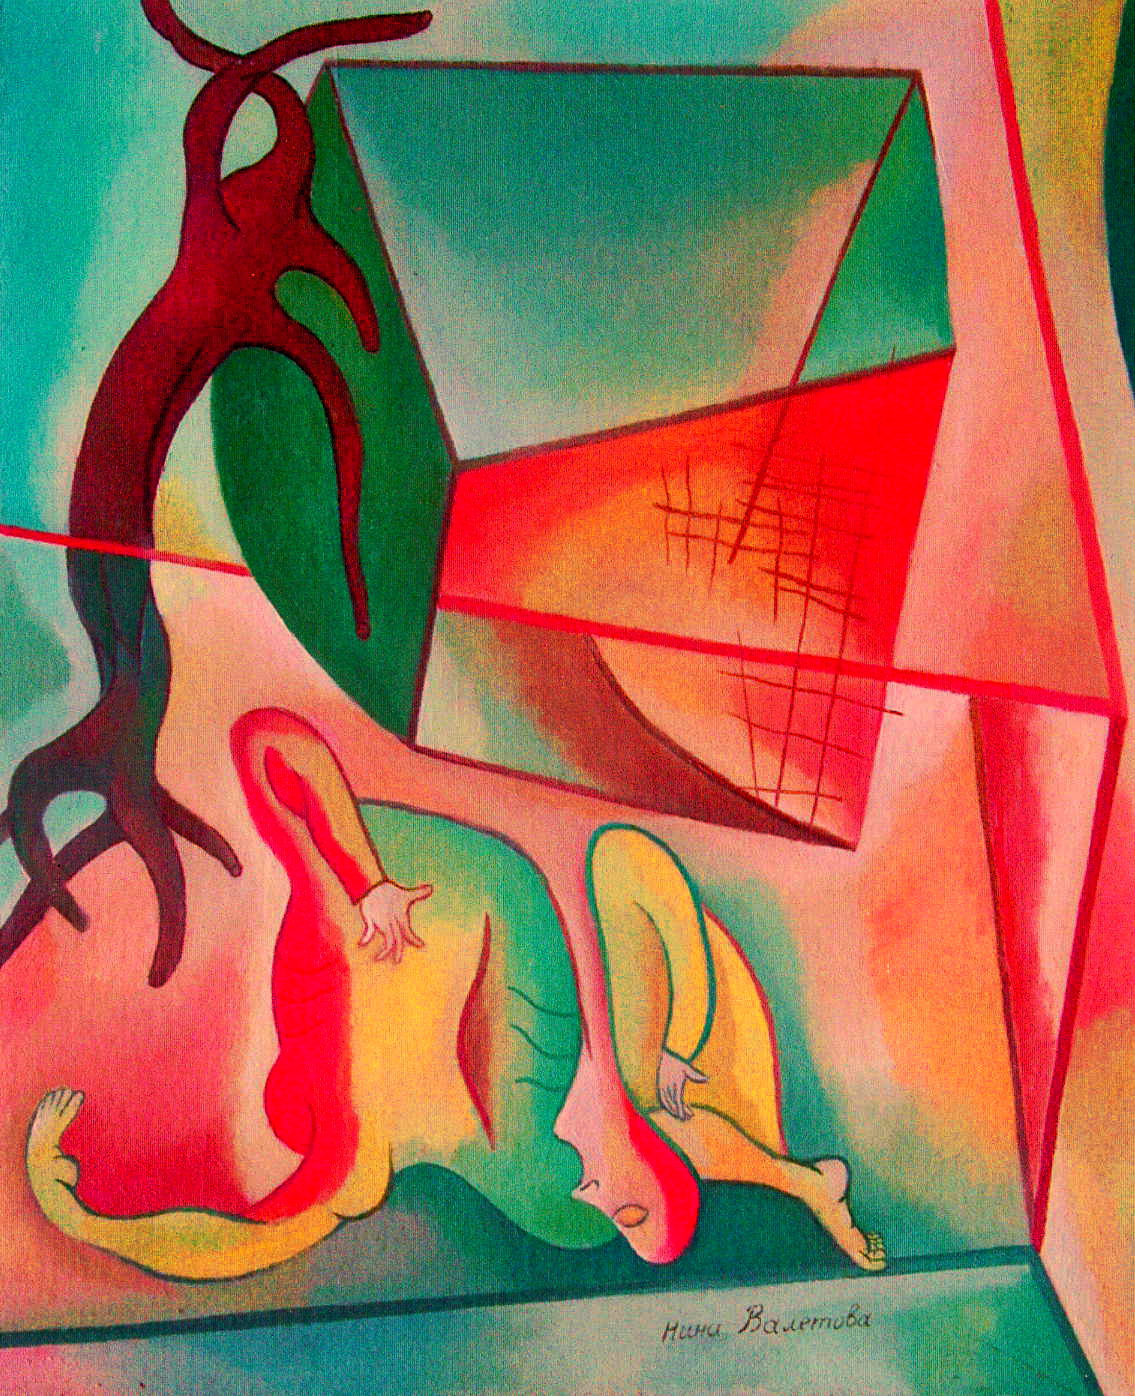 Reflection, oil painting, 1998.jpg